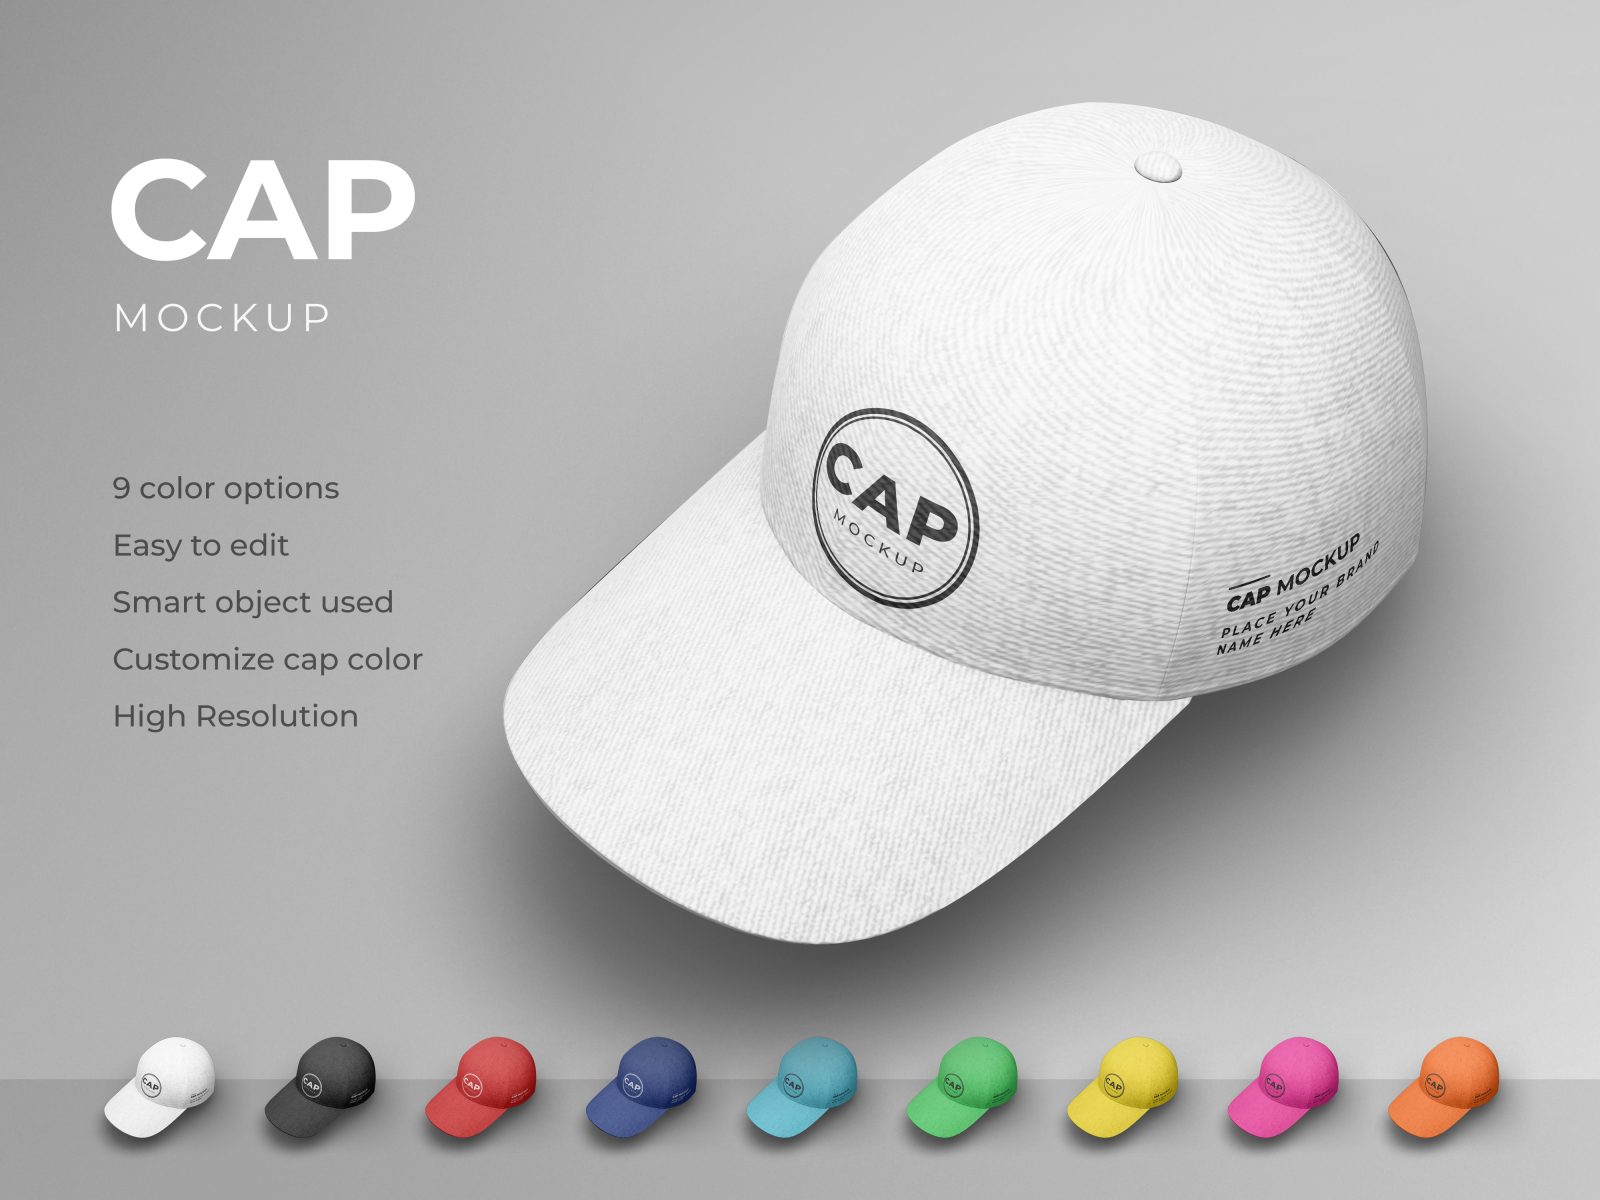 Cap mockup template by Graphic Arena on Dribbble